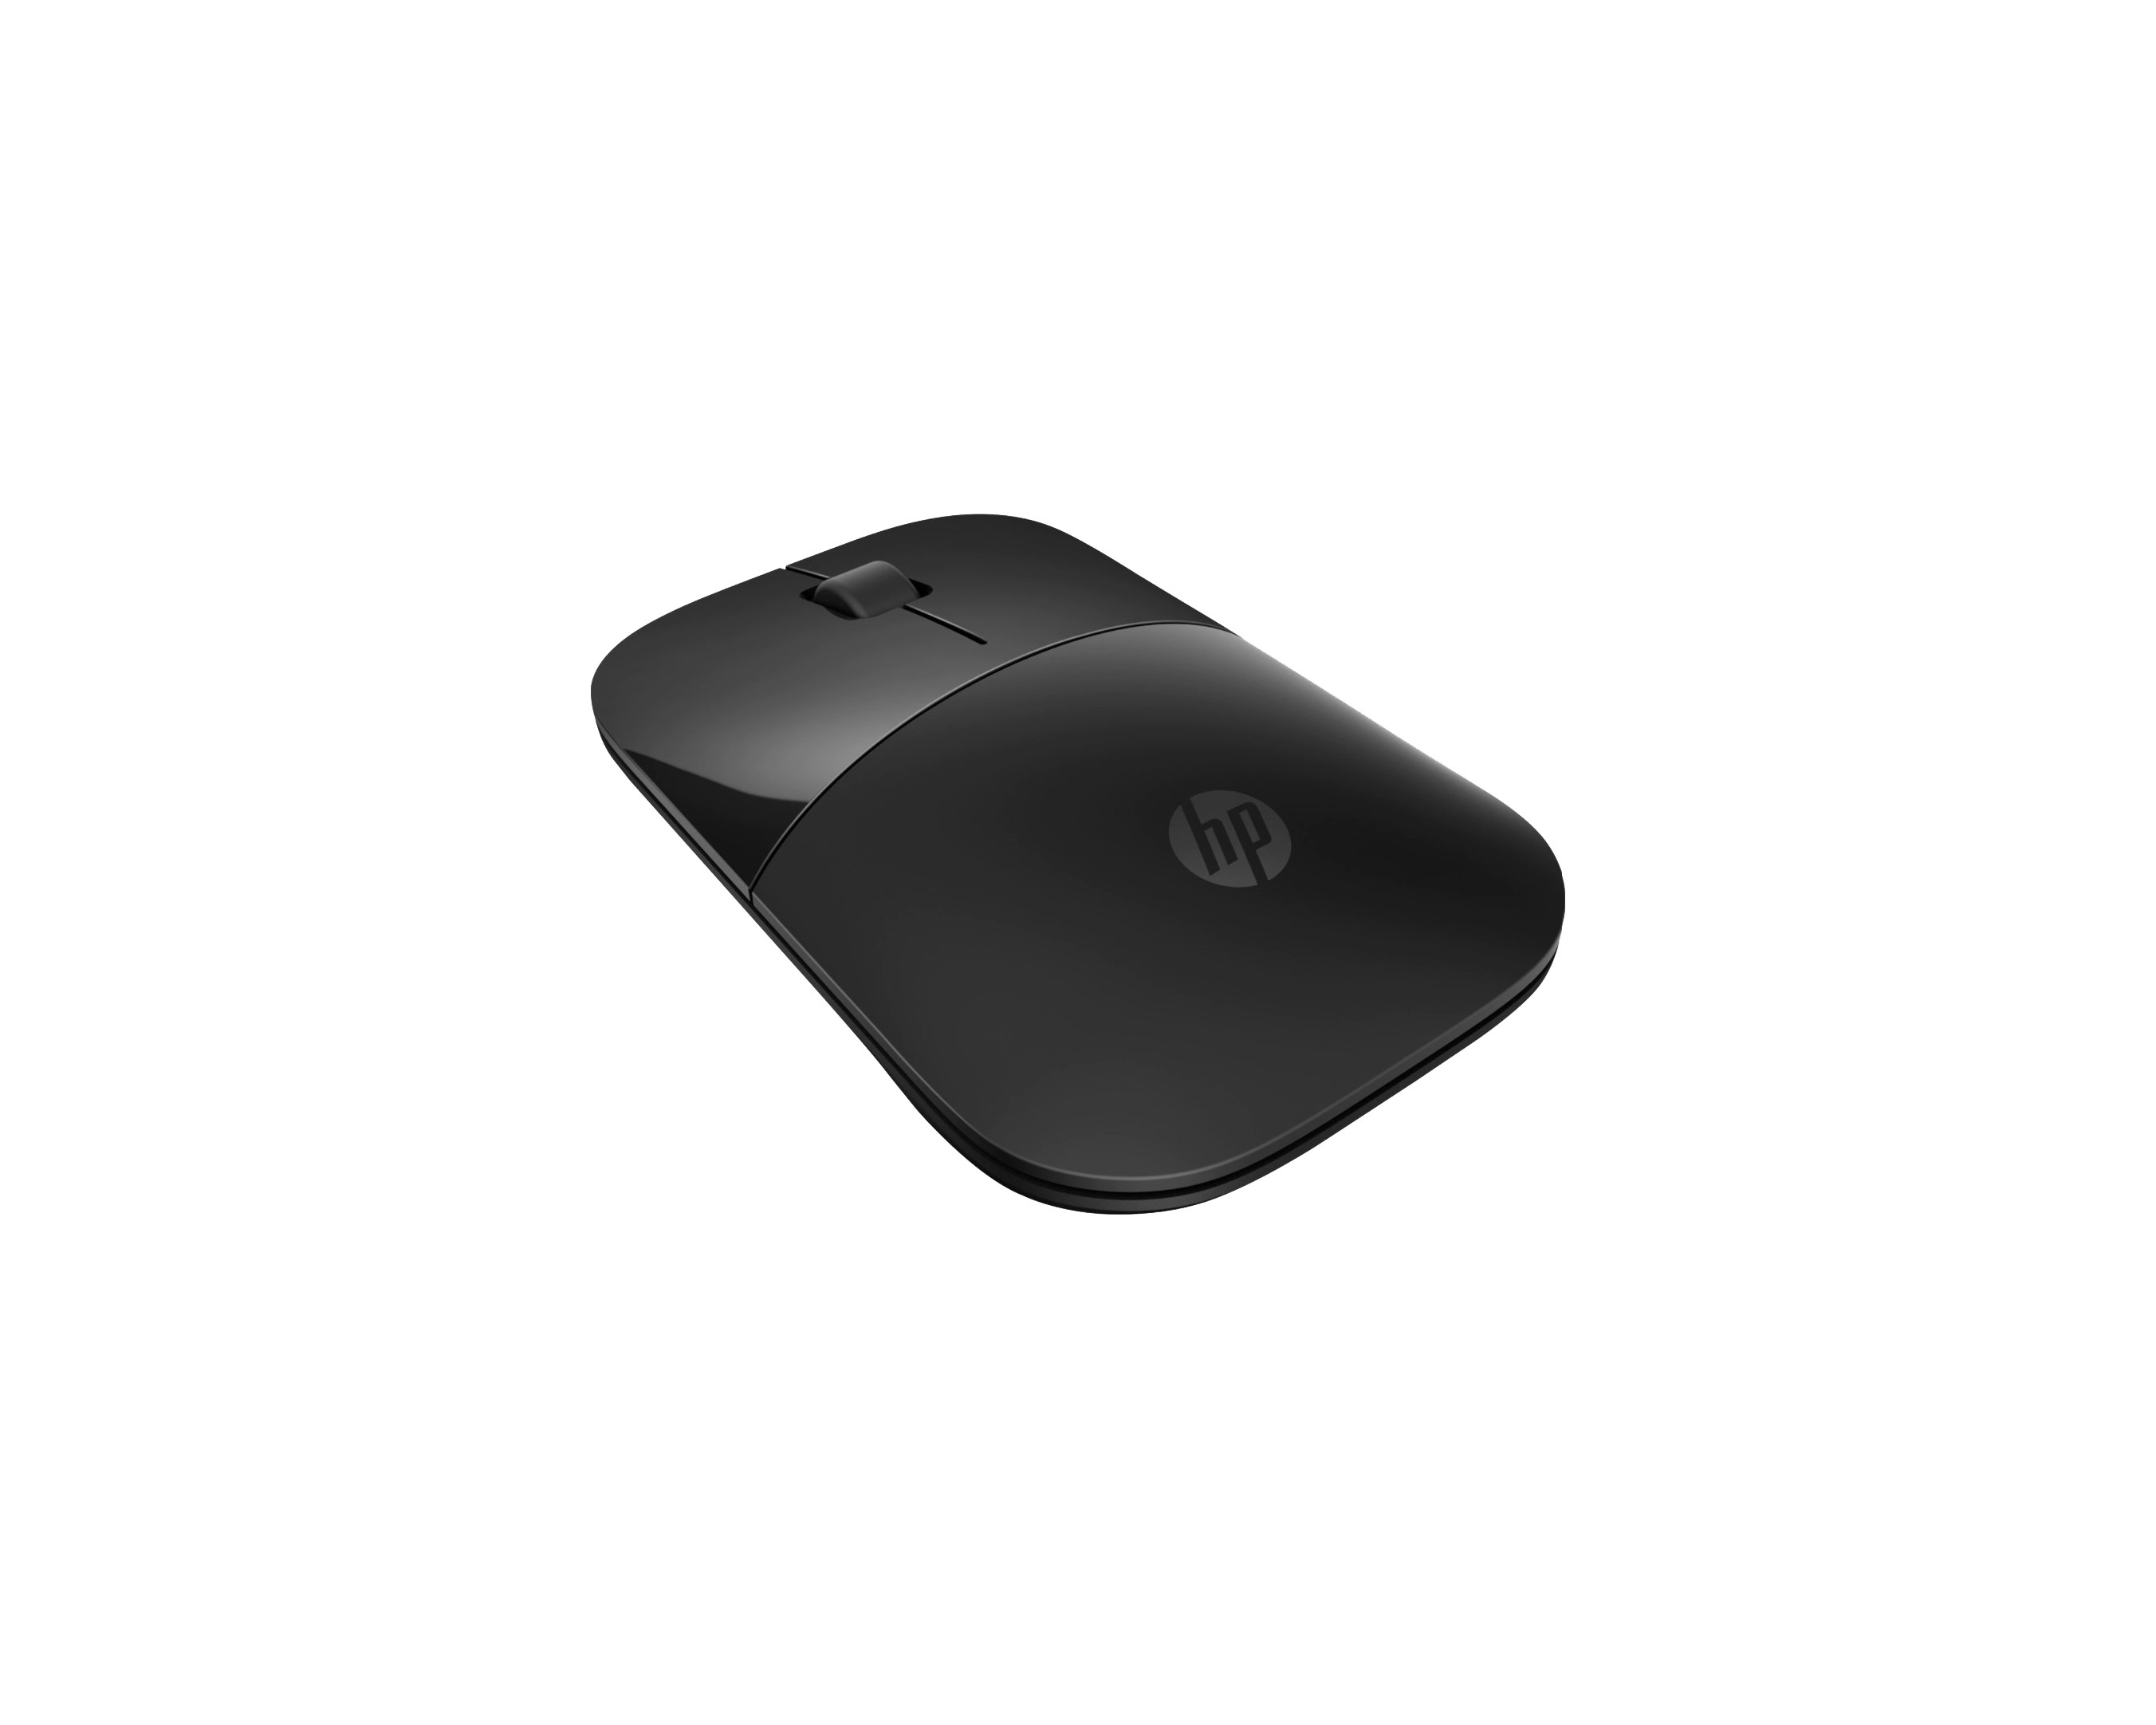 Mail HP Z3700 - the Mouse Reviewing Daily Wireless